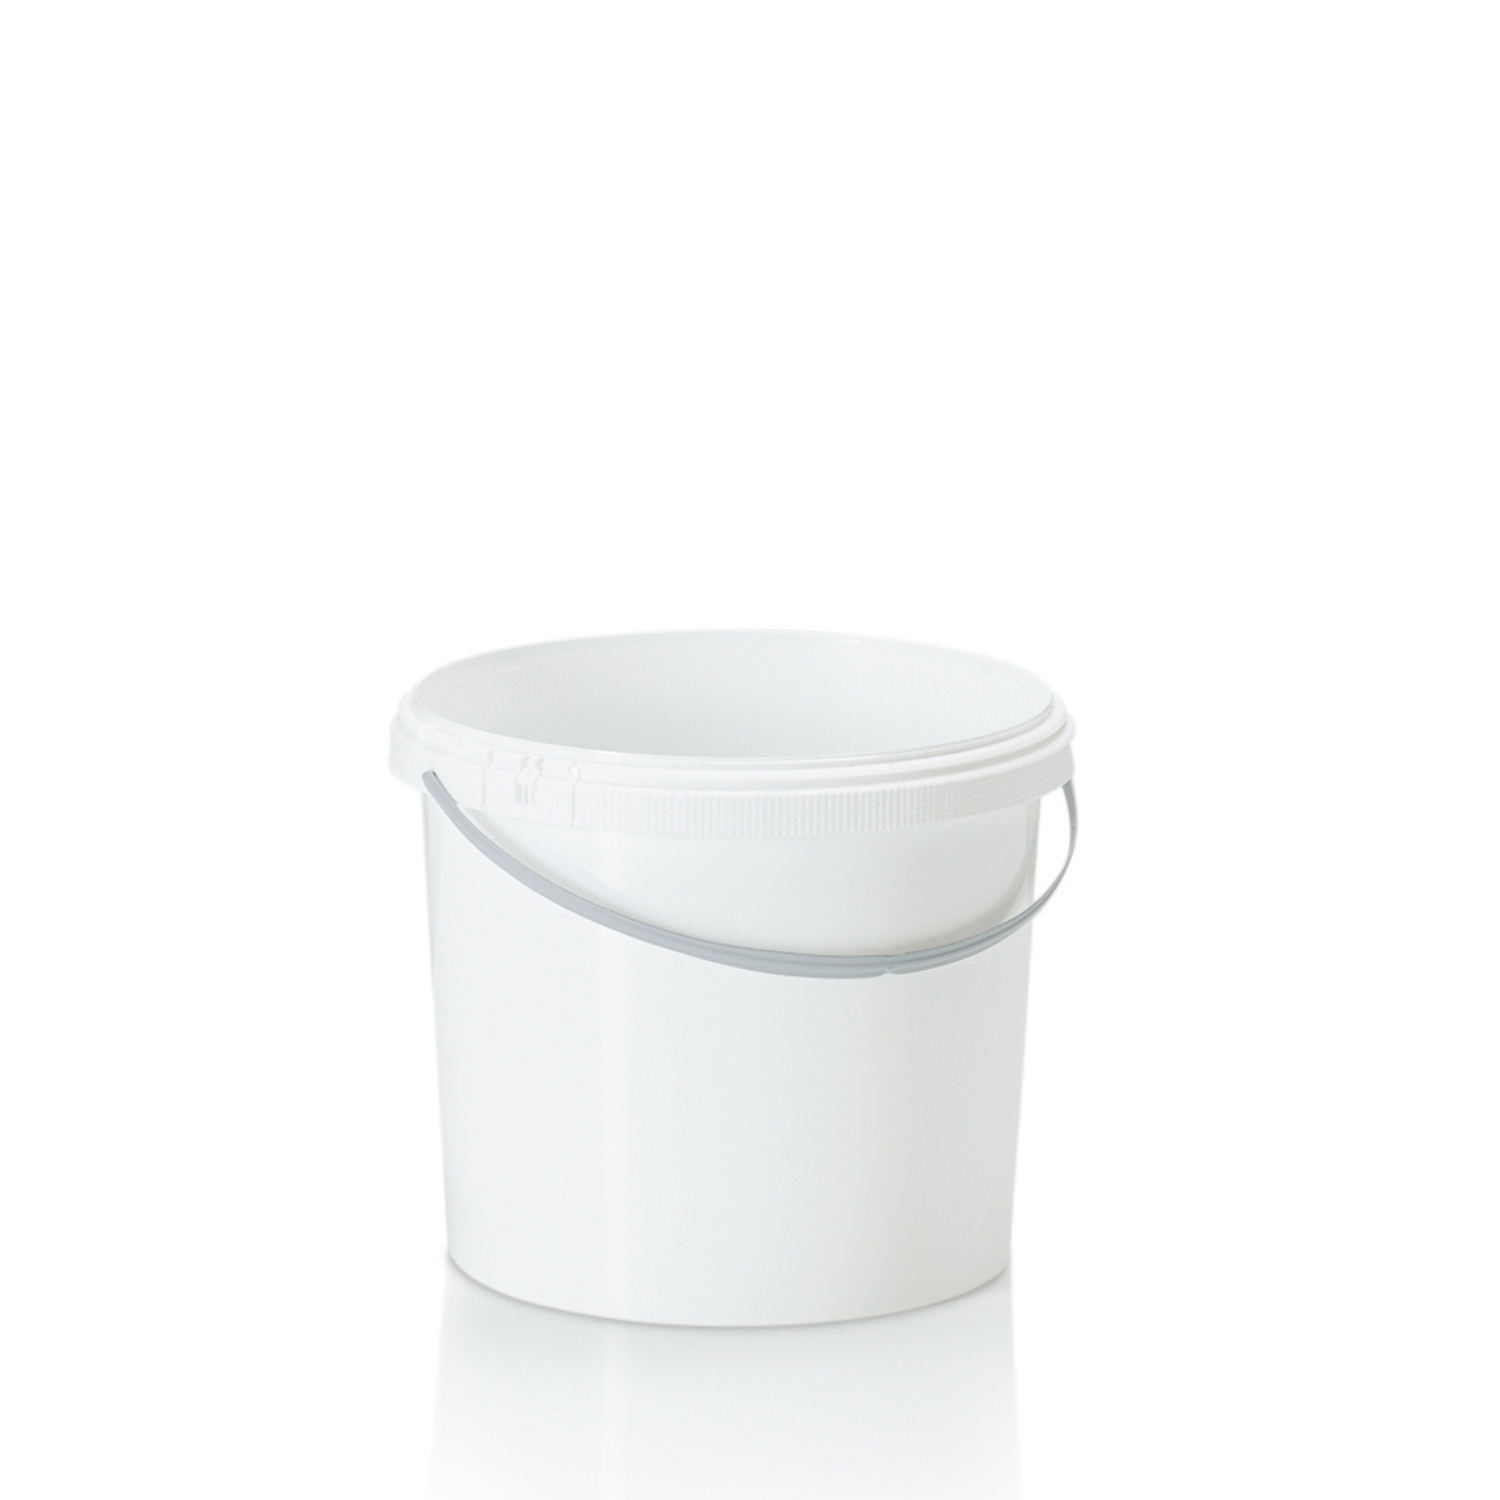 5ltr White PP Tamper Evident Pail with Strap Handle